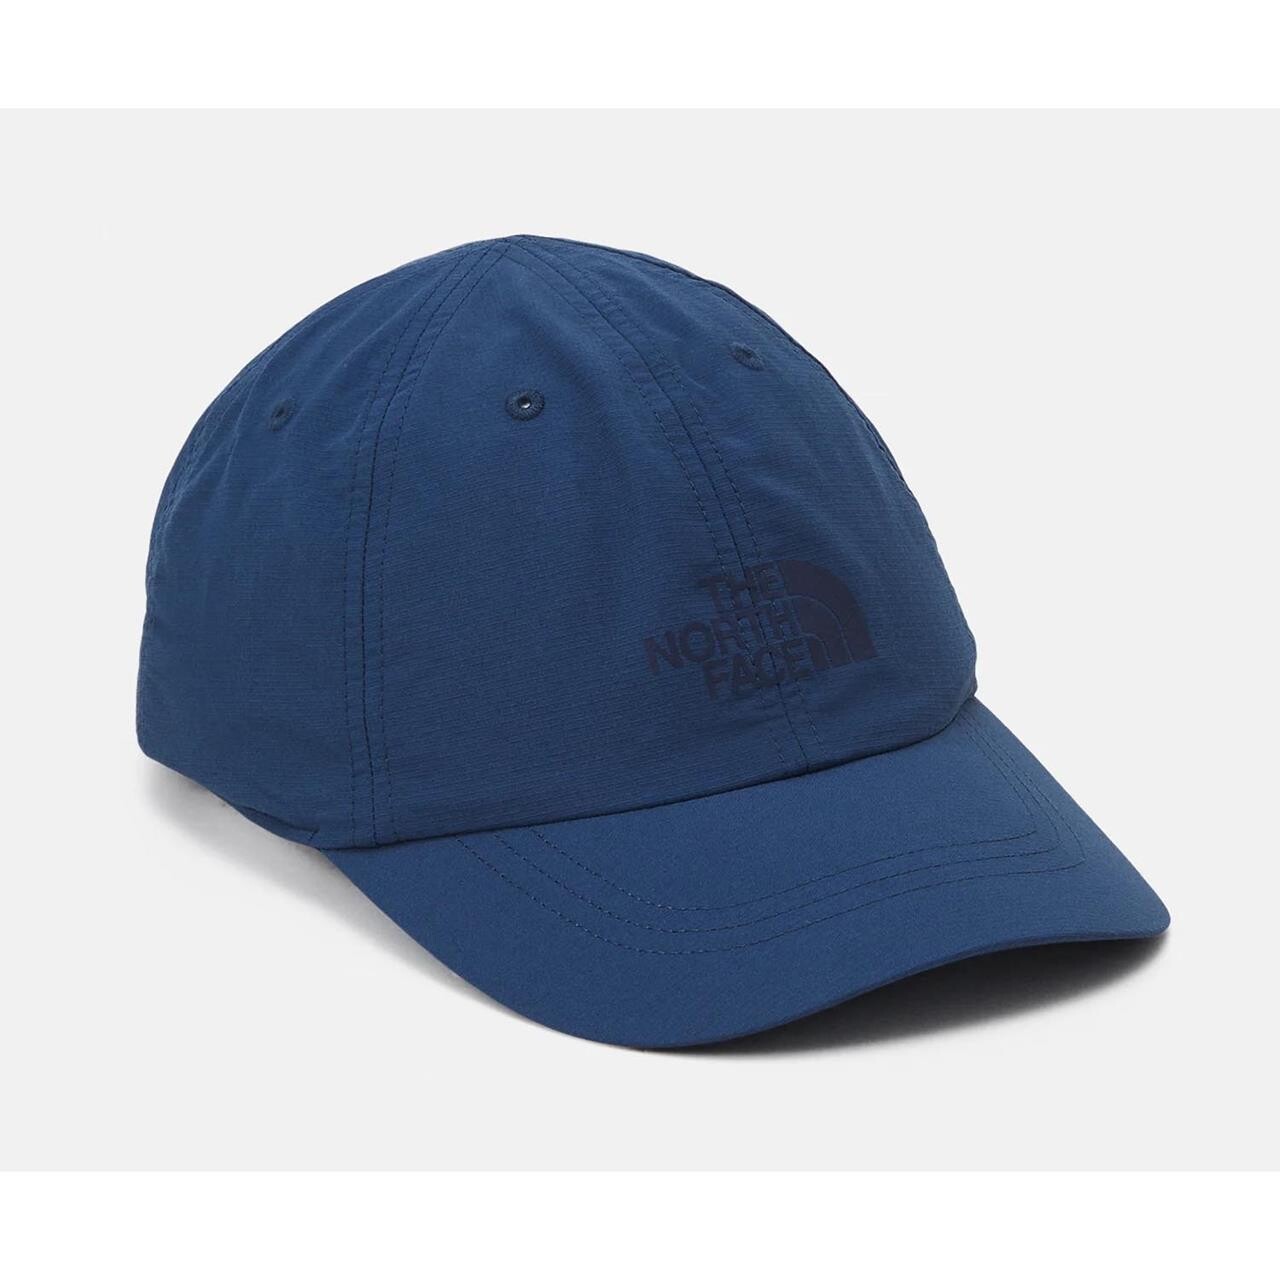 10: The North Face Horizon Hat (Blå (SHADY BLUE) One size)